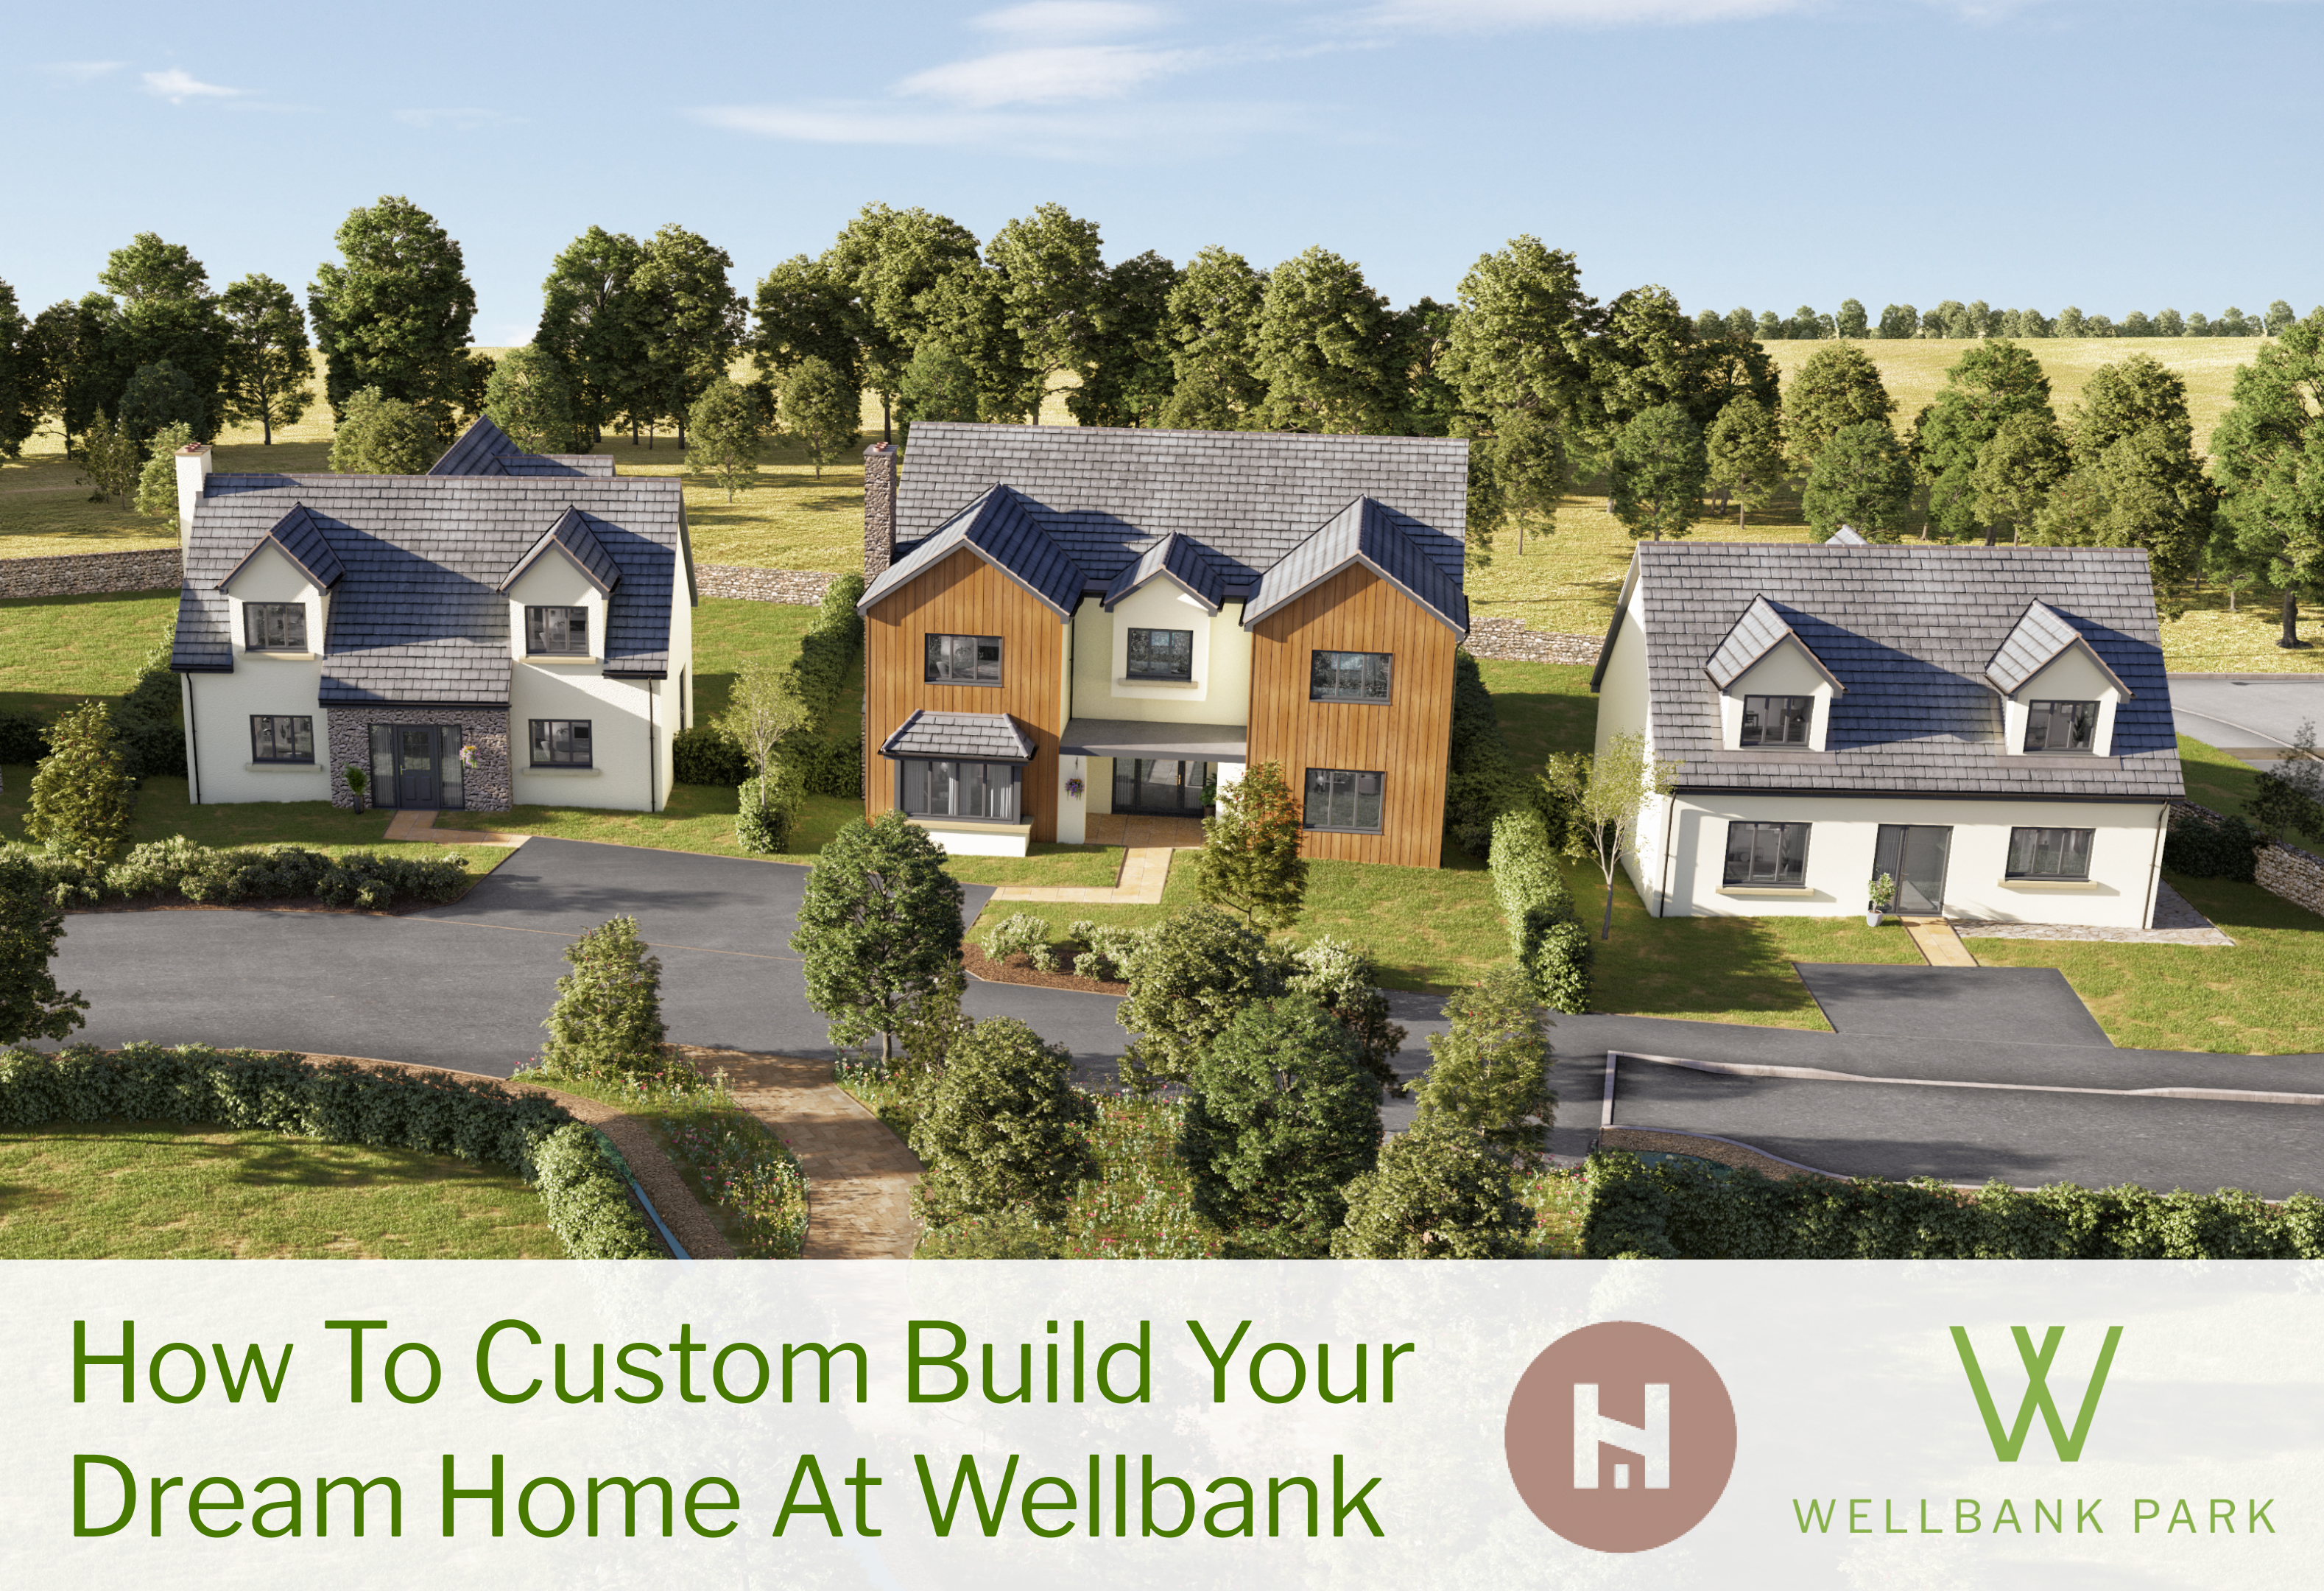 How to Custom Build Your Dream Home At Wellbank Park